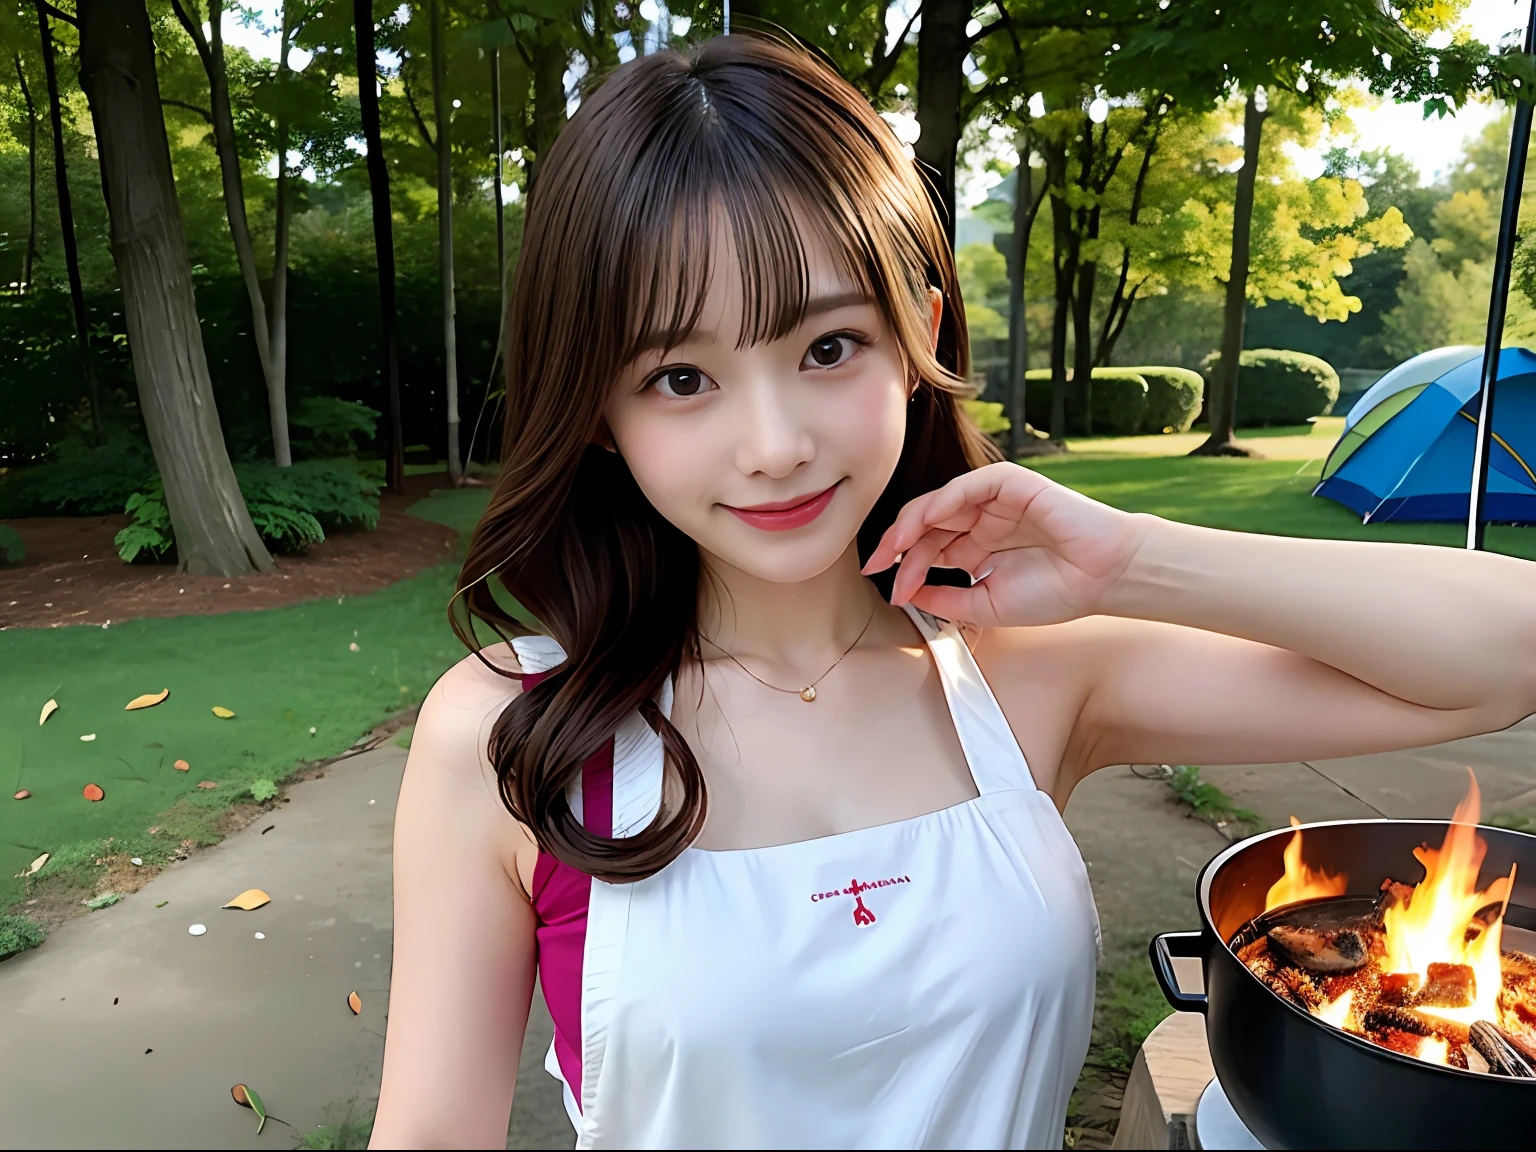 Best Quality,masuter piece,超A high resolution,(photographrealistic),Cute Girl,Sexy Pose,8K,NFSW,Raw photo,A cute Japanese woman,Smile,up of face、Longhaire、curls、a blond、full of sweat、Brown-skinned、Blonde hair、camp、bonfire、Apron、campsite、Cooking rice、cuite、alcohol、